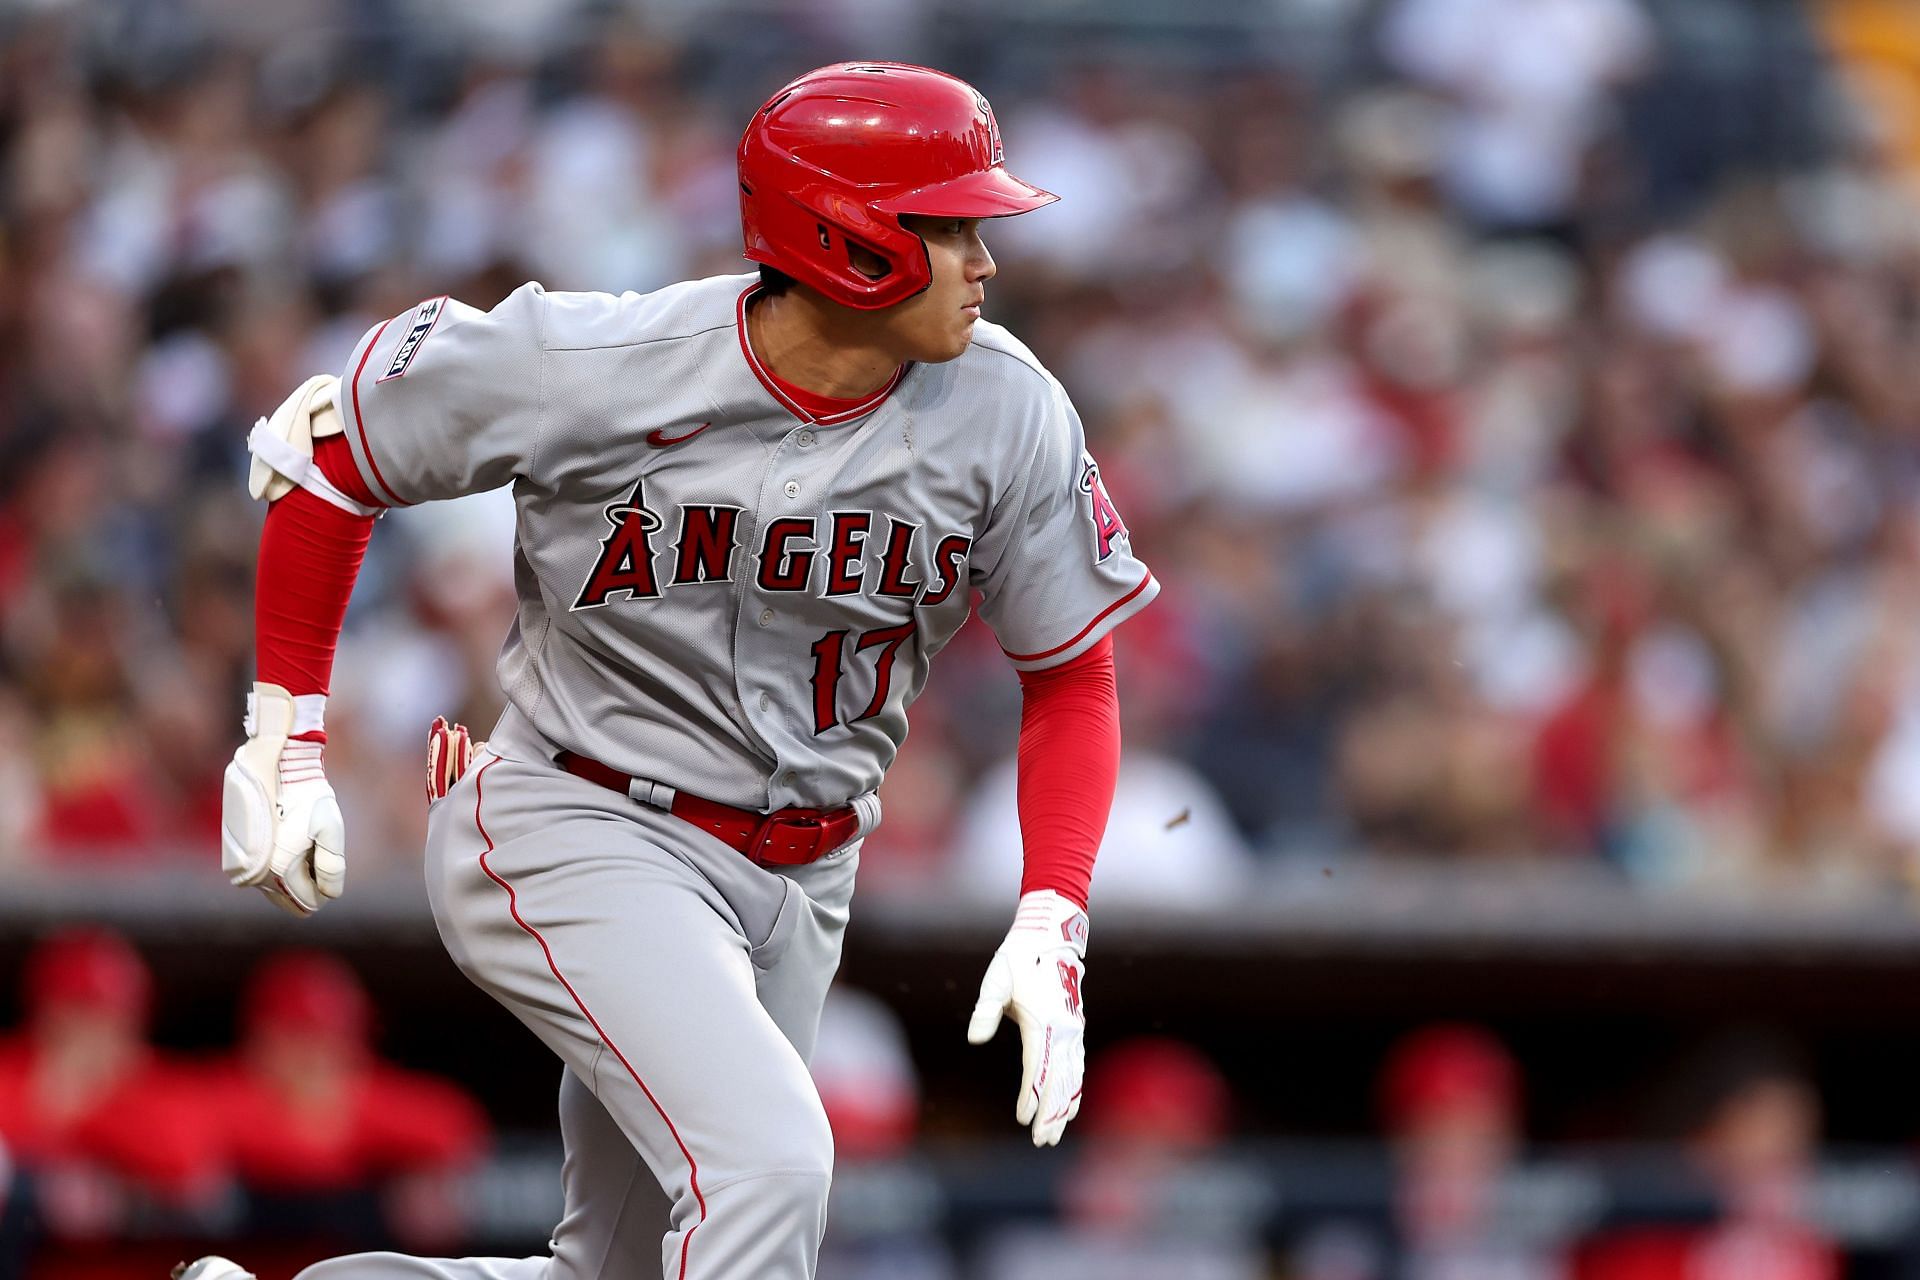 Padres on deck: Shohei Ohtani bringing contending Angels to Petco